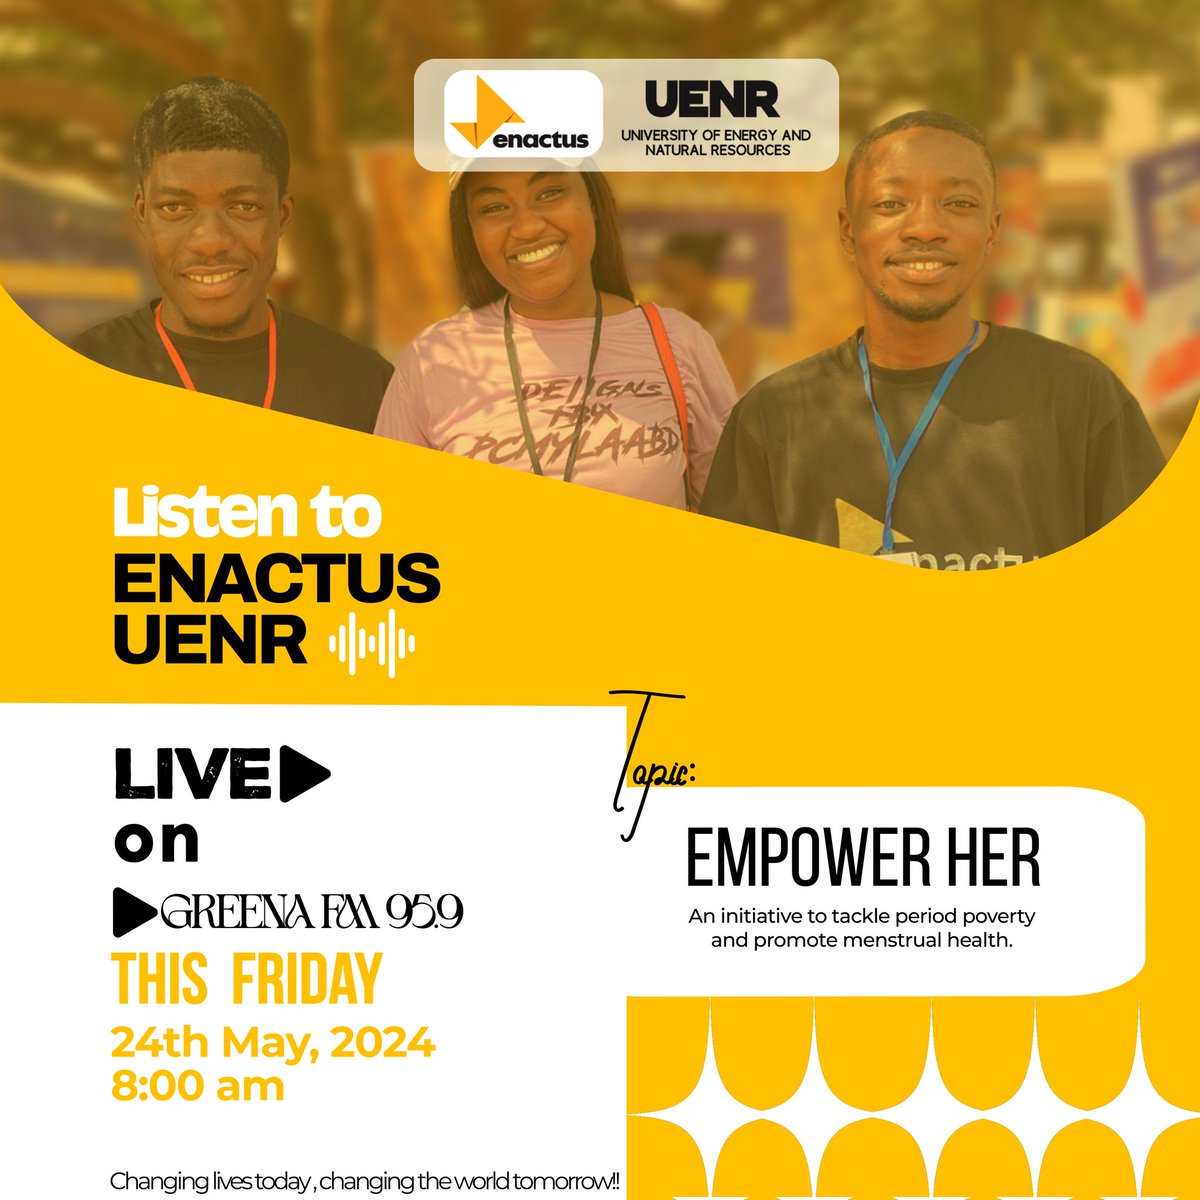 Hurray... Listen to ENACTUS UENR on Greena FM 95.9 for an exciting conversation on Empower Her: a social initiative to tackle period poverty and promote menstrual health.

#endperiodpoverty #greenafm #weallwin